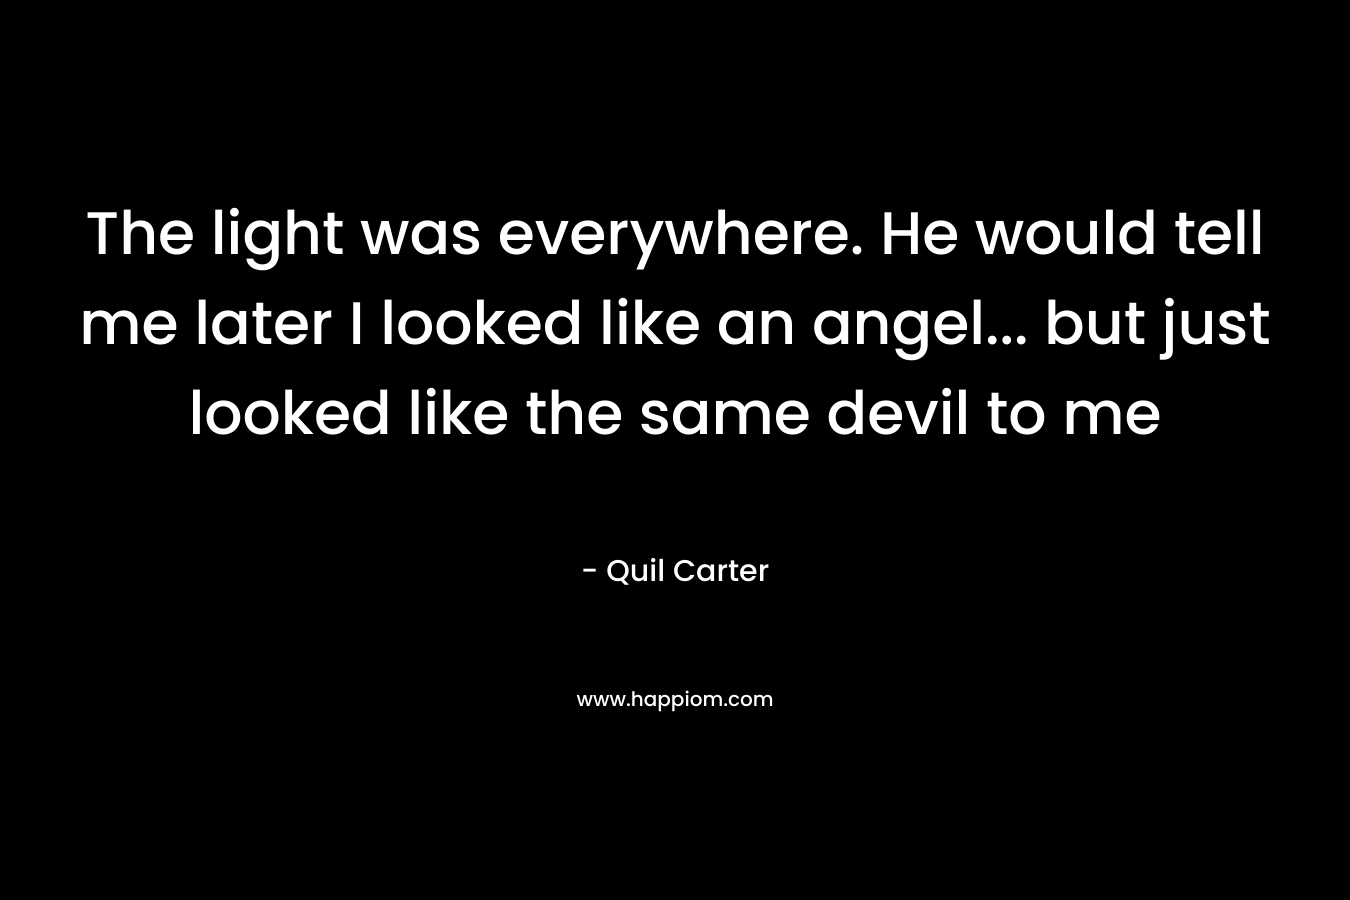 The light was everywhere. He would tell me later I looked like an angel... but just looked like the same devil to me